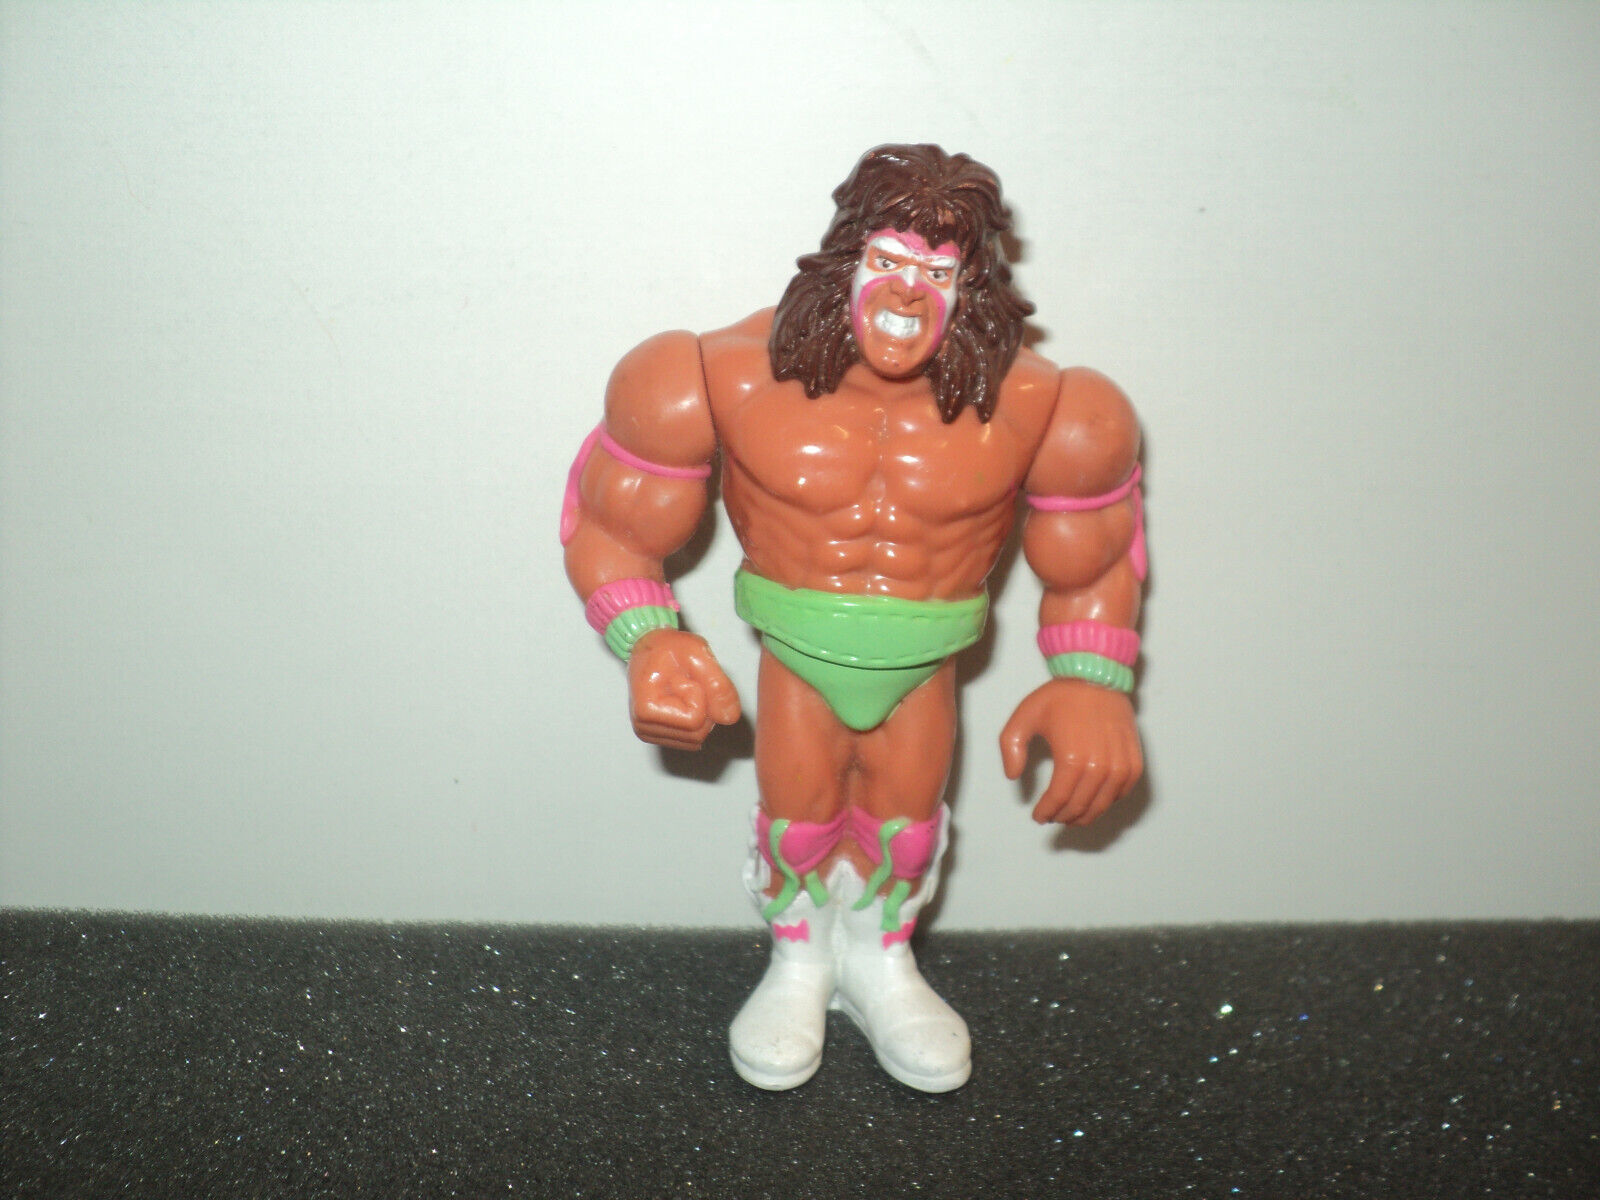 Primary image for Titan Sports Hasbro Ultimate Warrior Figure 1990 Vintage 4 1/2" High